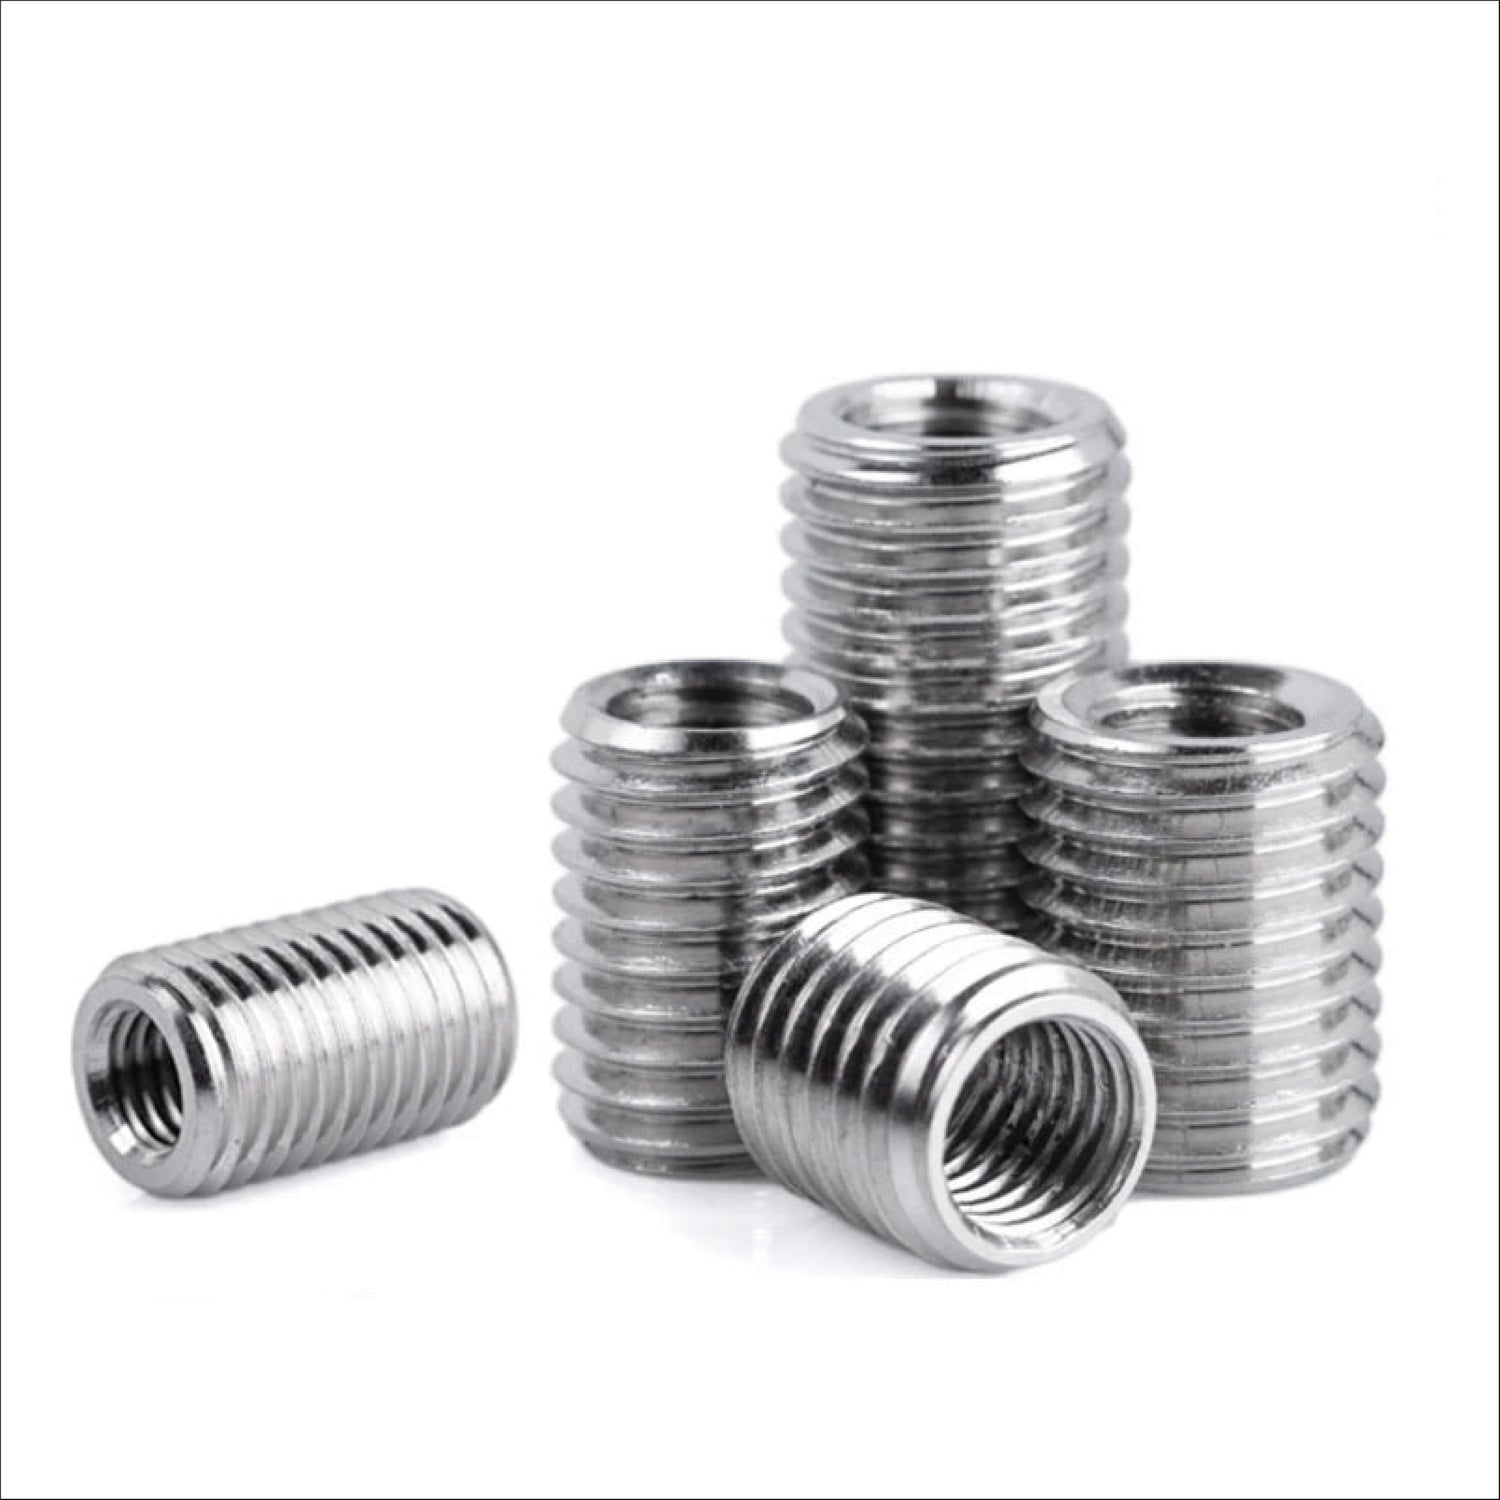 Stainless steel 304 inside outside thread Adapter screw OutM14 to InM10